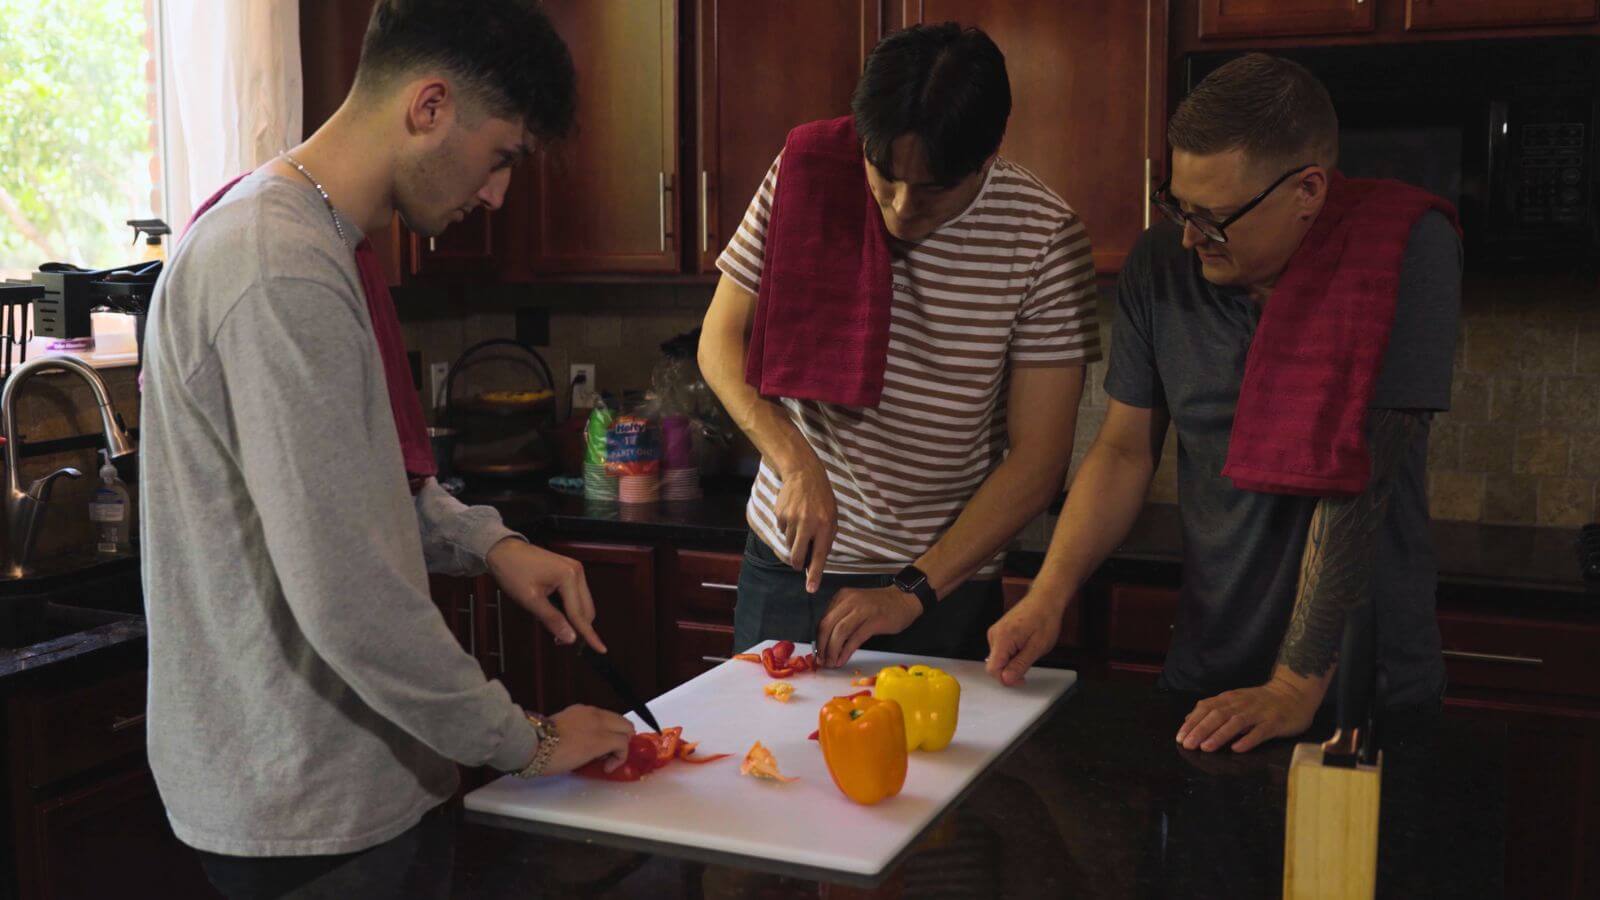 Men in transitional living learning life skills like cooking.